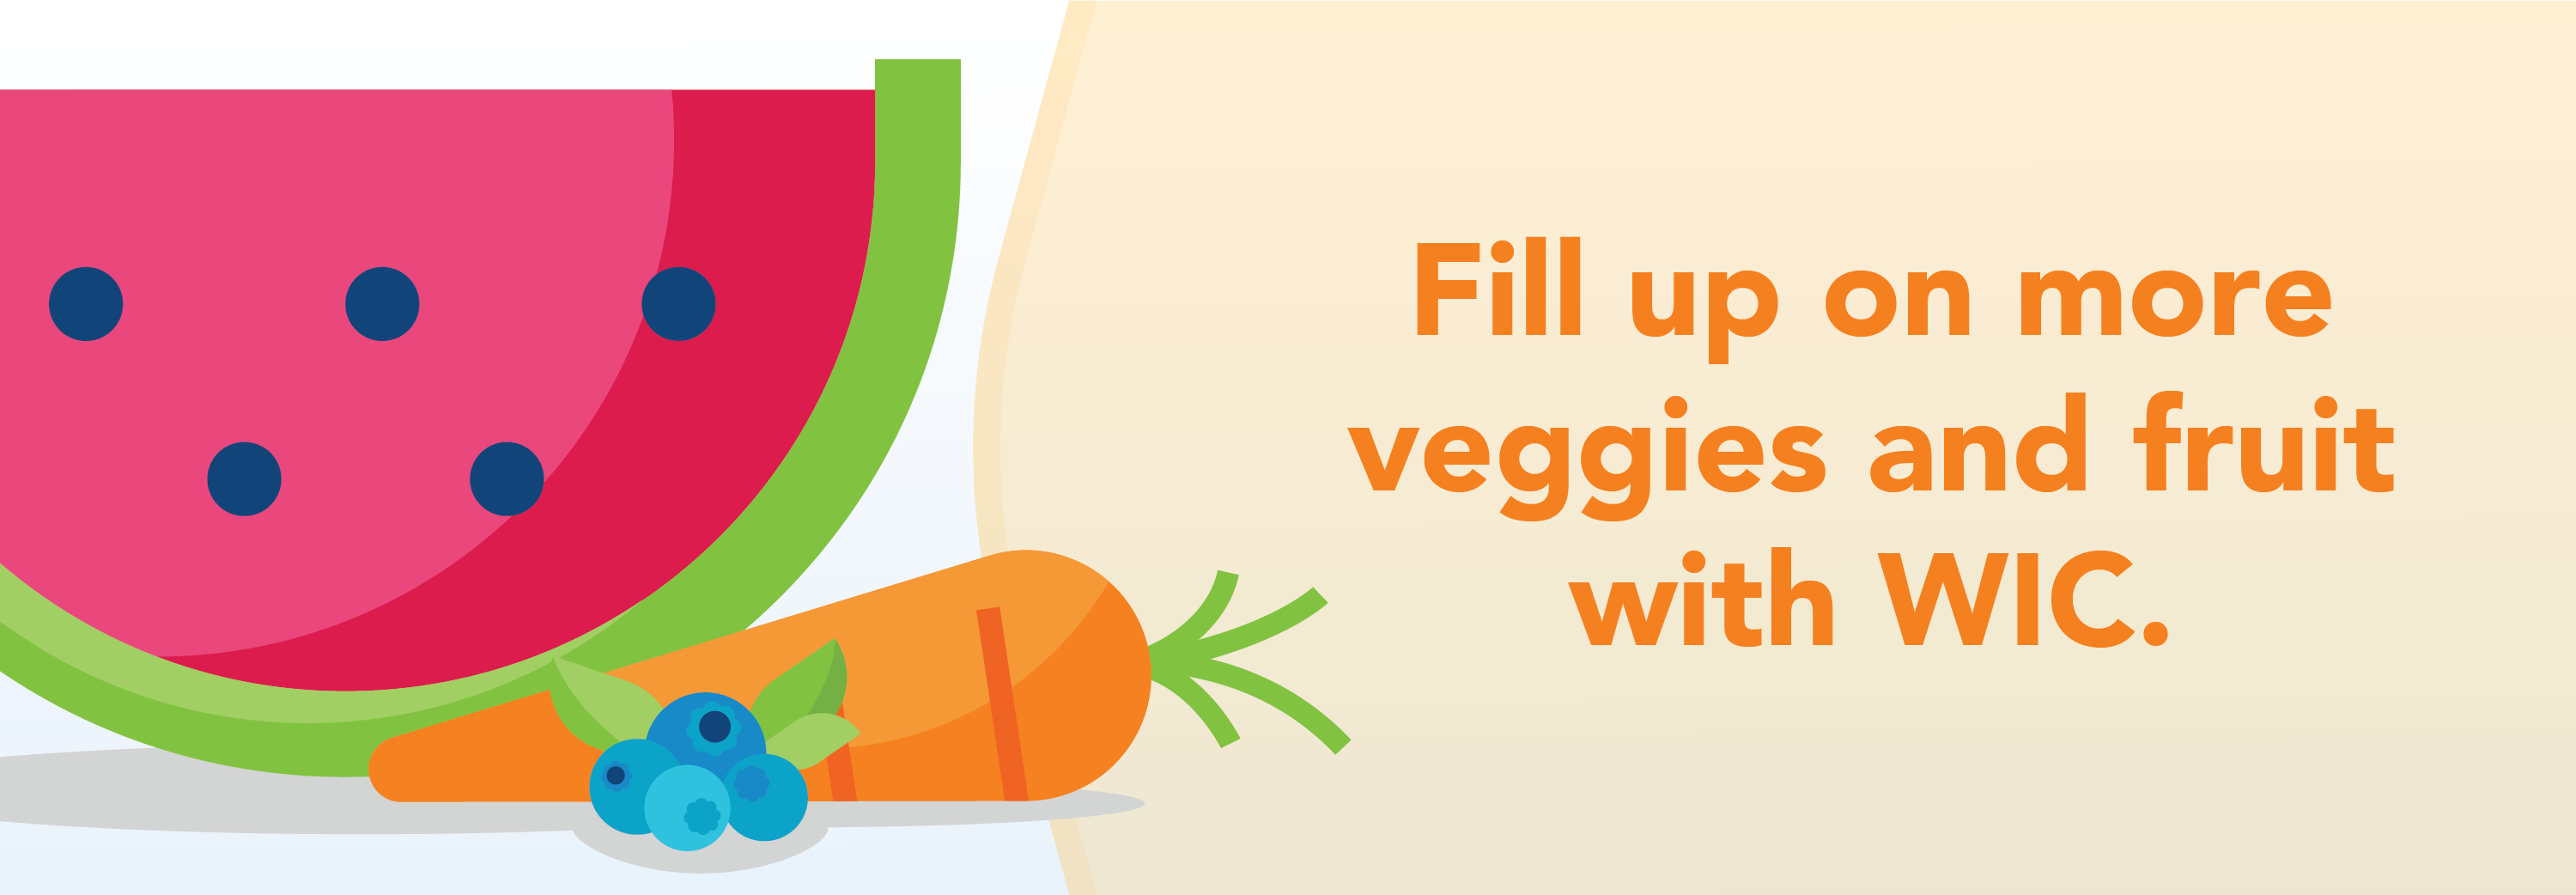 WIC banner: Fill up on more veggies and fruits this summer.